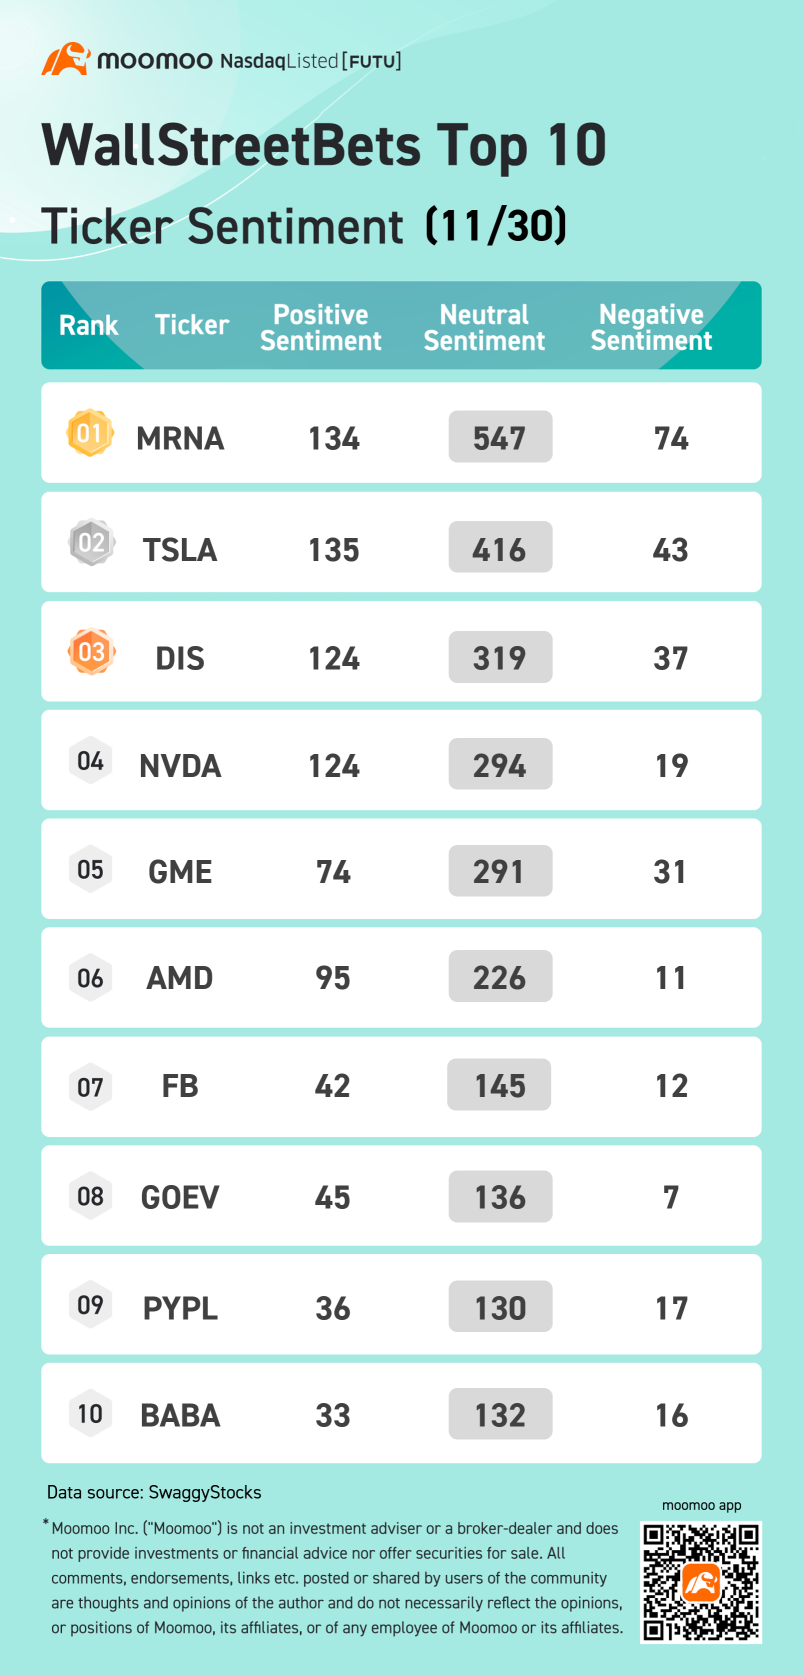 WallStreetBets top 10 ticker sentiment 11/30: MRNA, TSLA, DIS and more